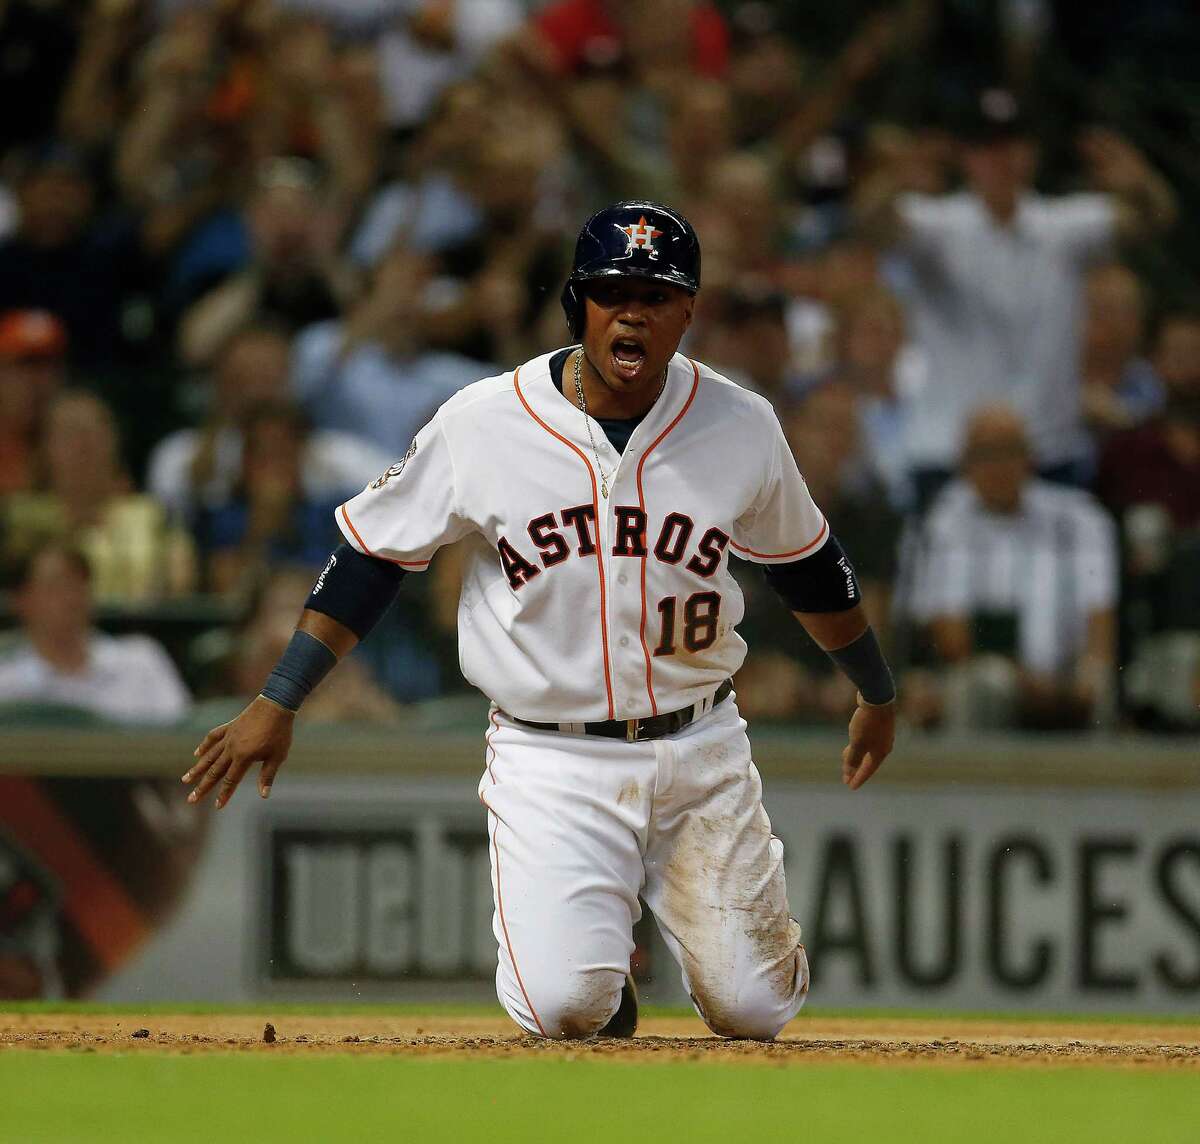 Astros third baseman Luis Valbuena was dishing out and taking punishment Tuesday night. He homered in the third, needed attention from trainer Nate Lucero, left, after being hit by a pitch in the fifth, and let loose after scoring an insurance run in the eighth, right.